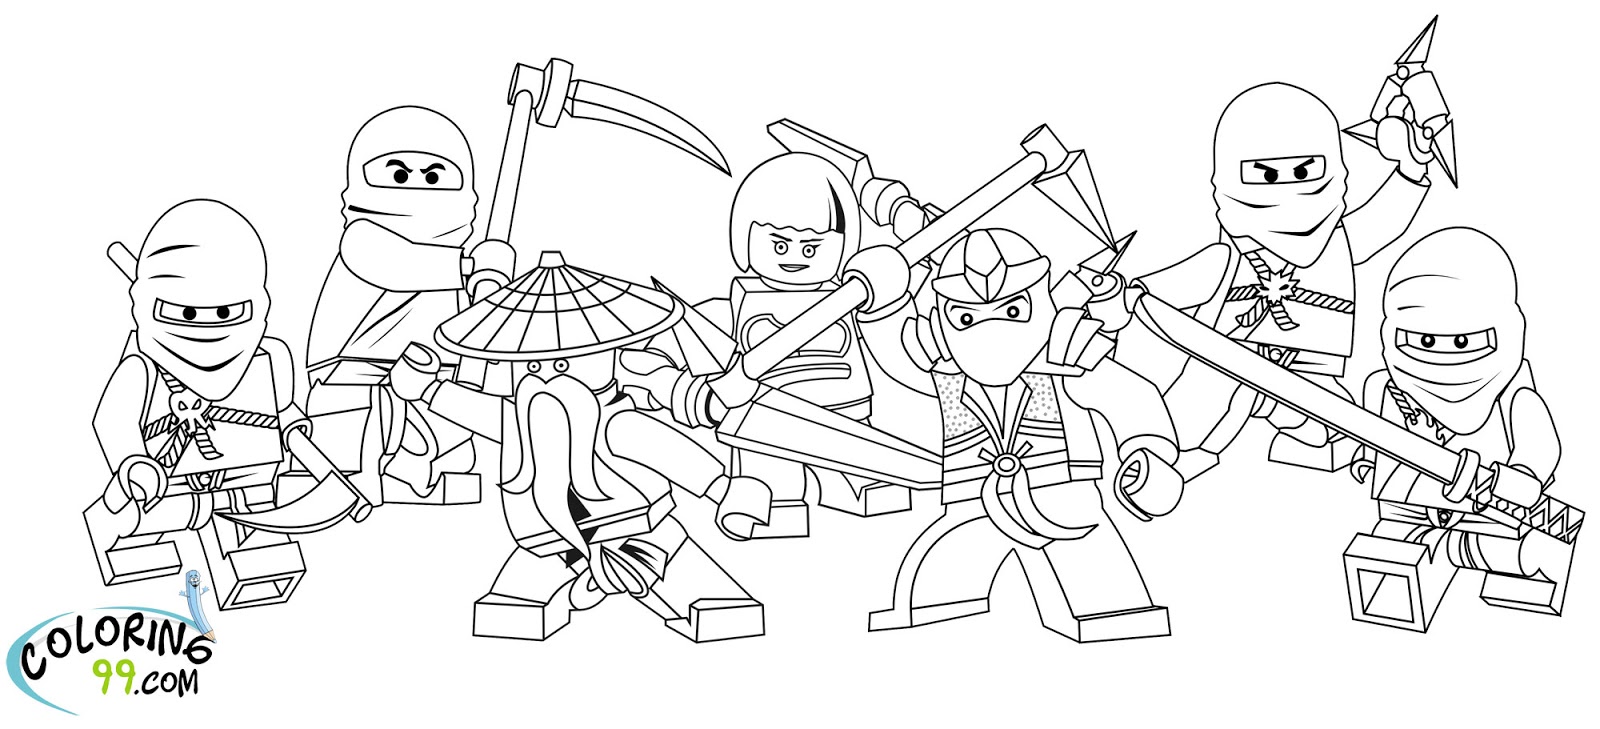 Download LEGO Ninjago Coloring Pages | Team colors